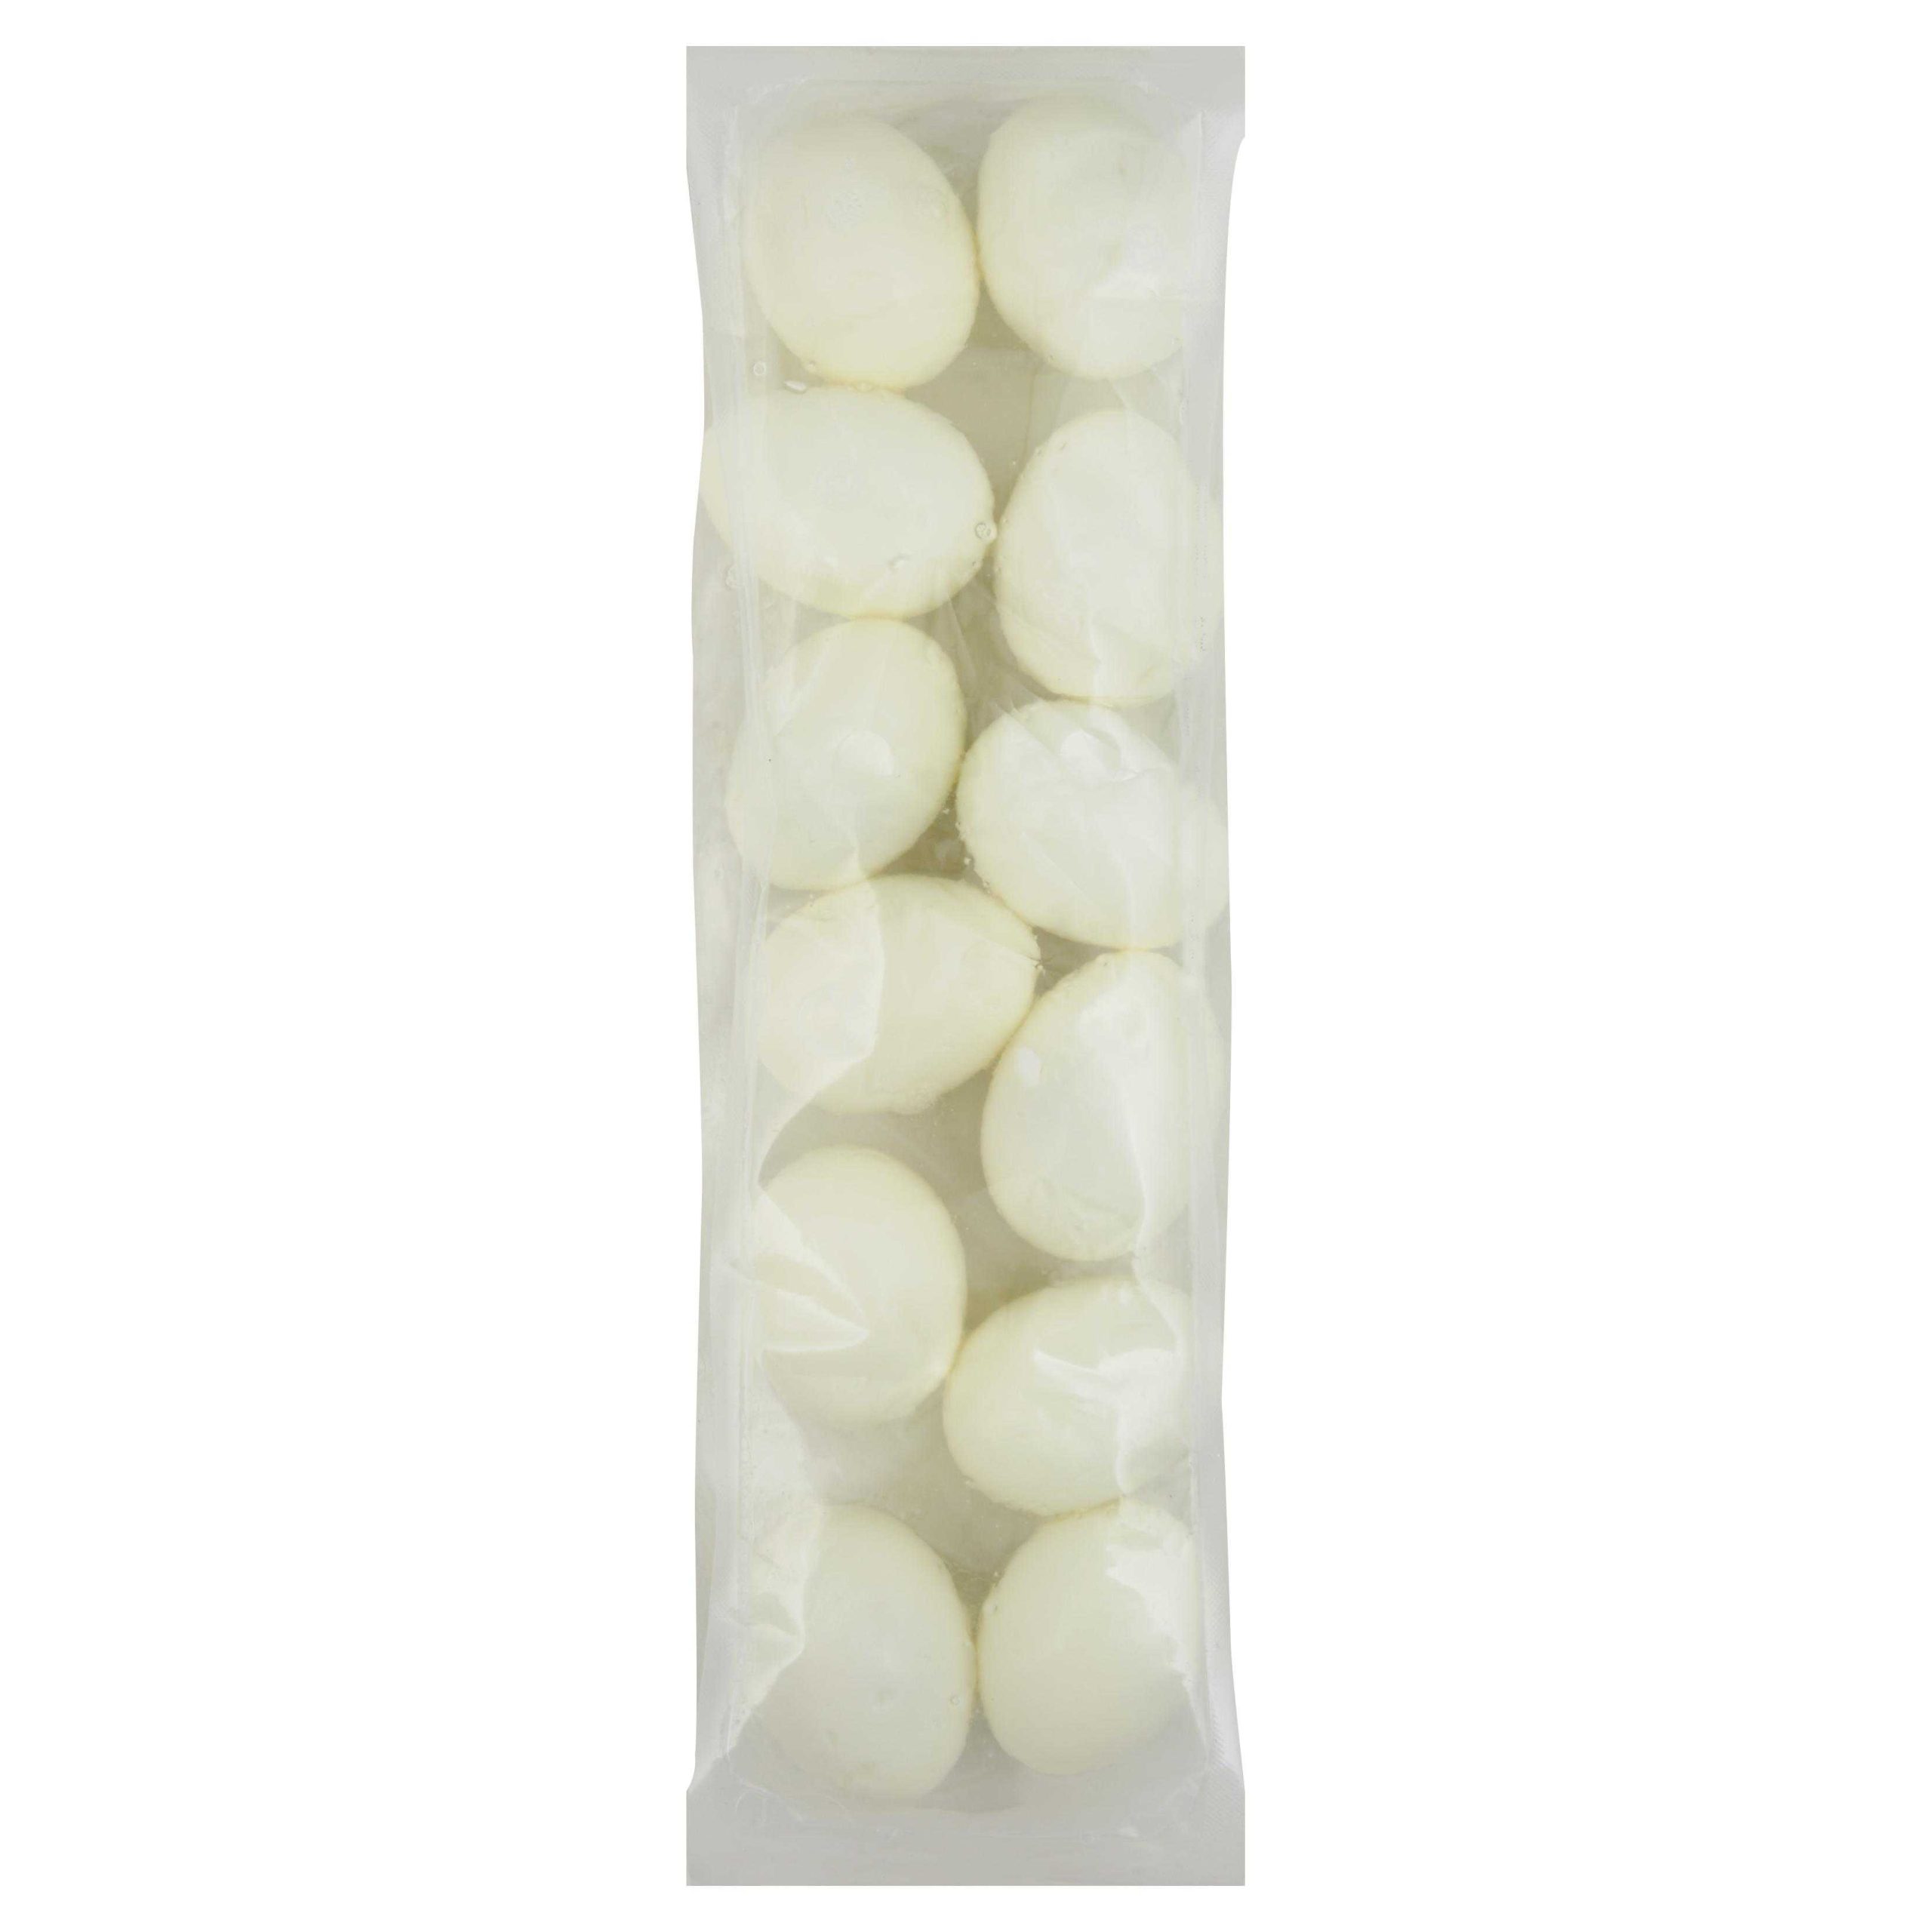 Papetti’s® Peeled Hard Cooked Eggs, 12/12 Count Dry Pack